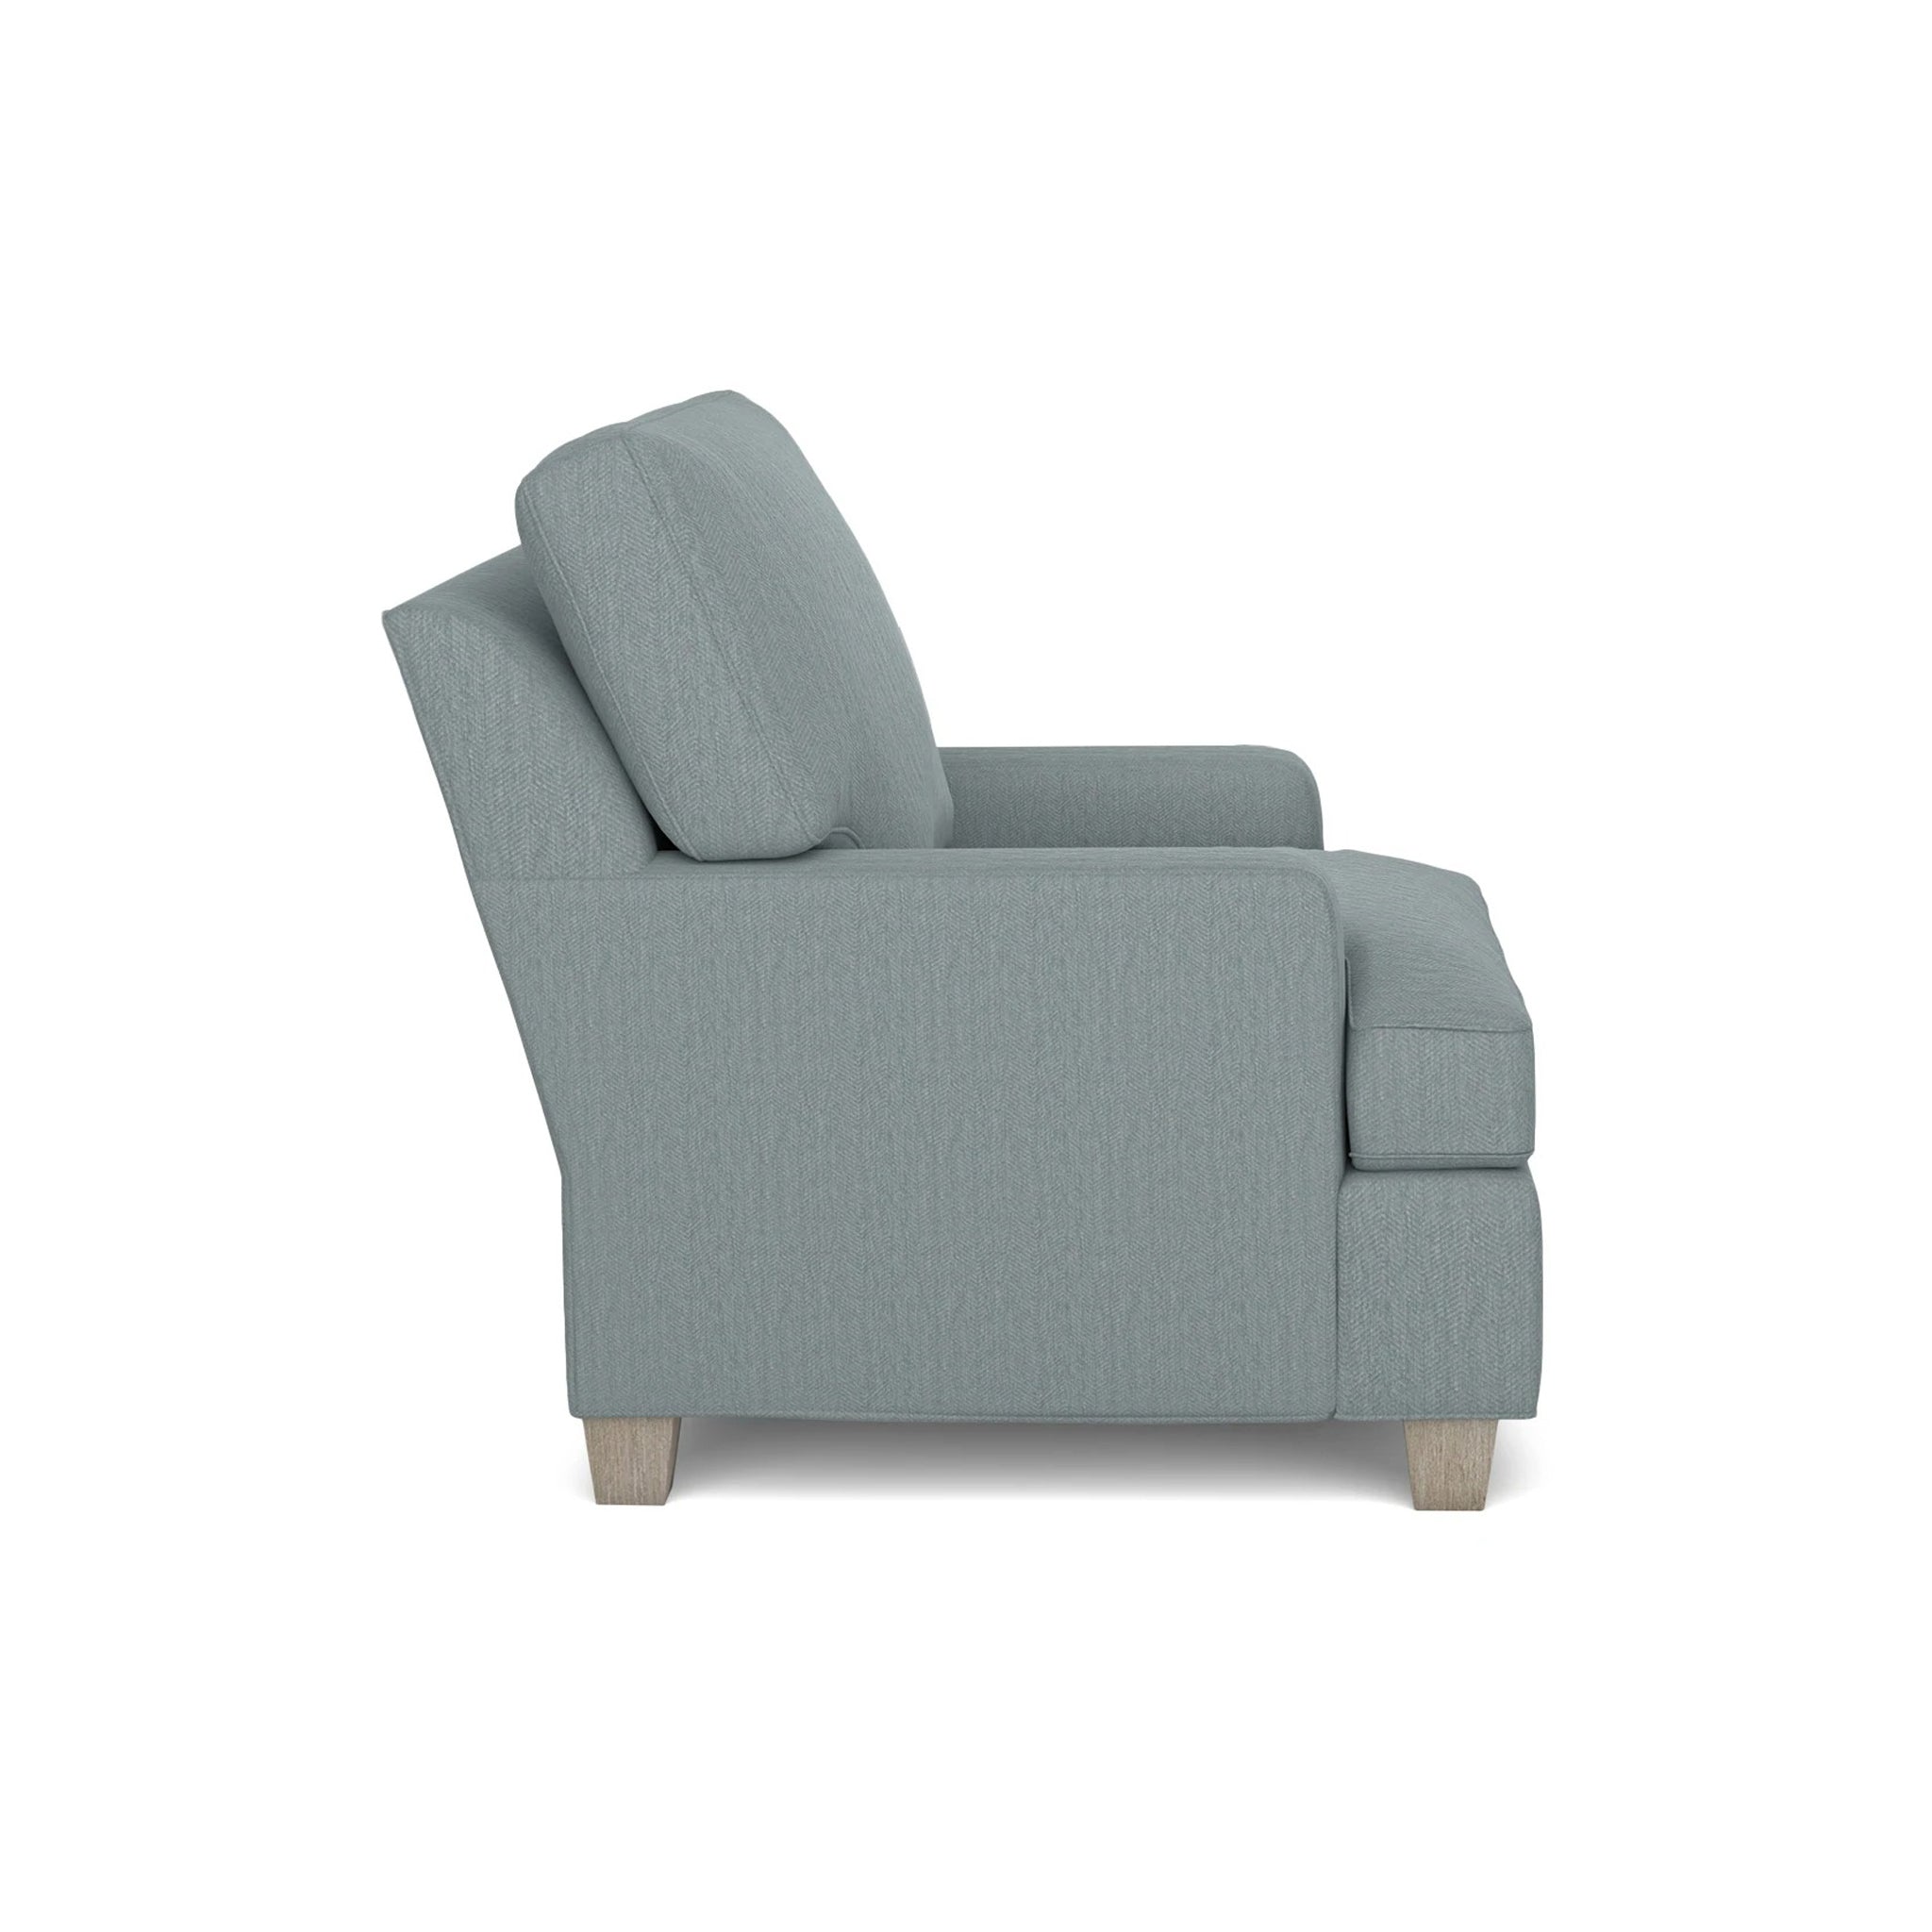 The Crag House Collection - Arm Chair